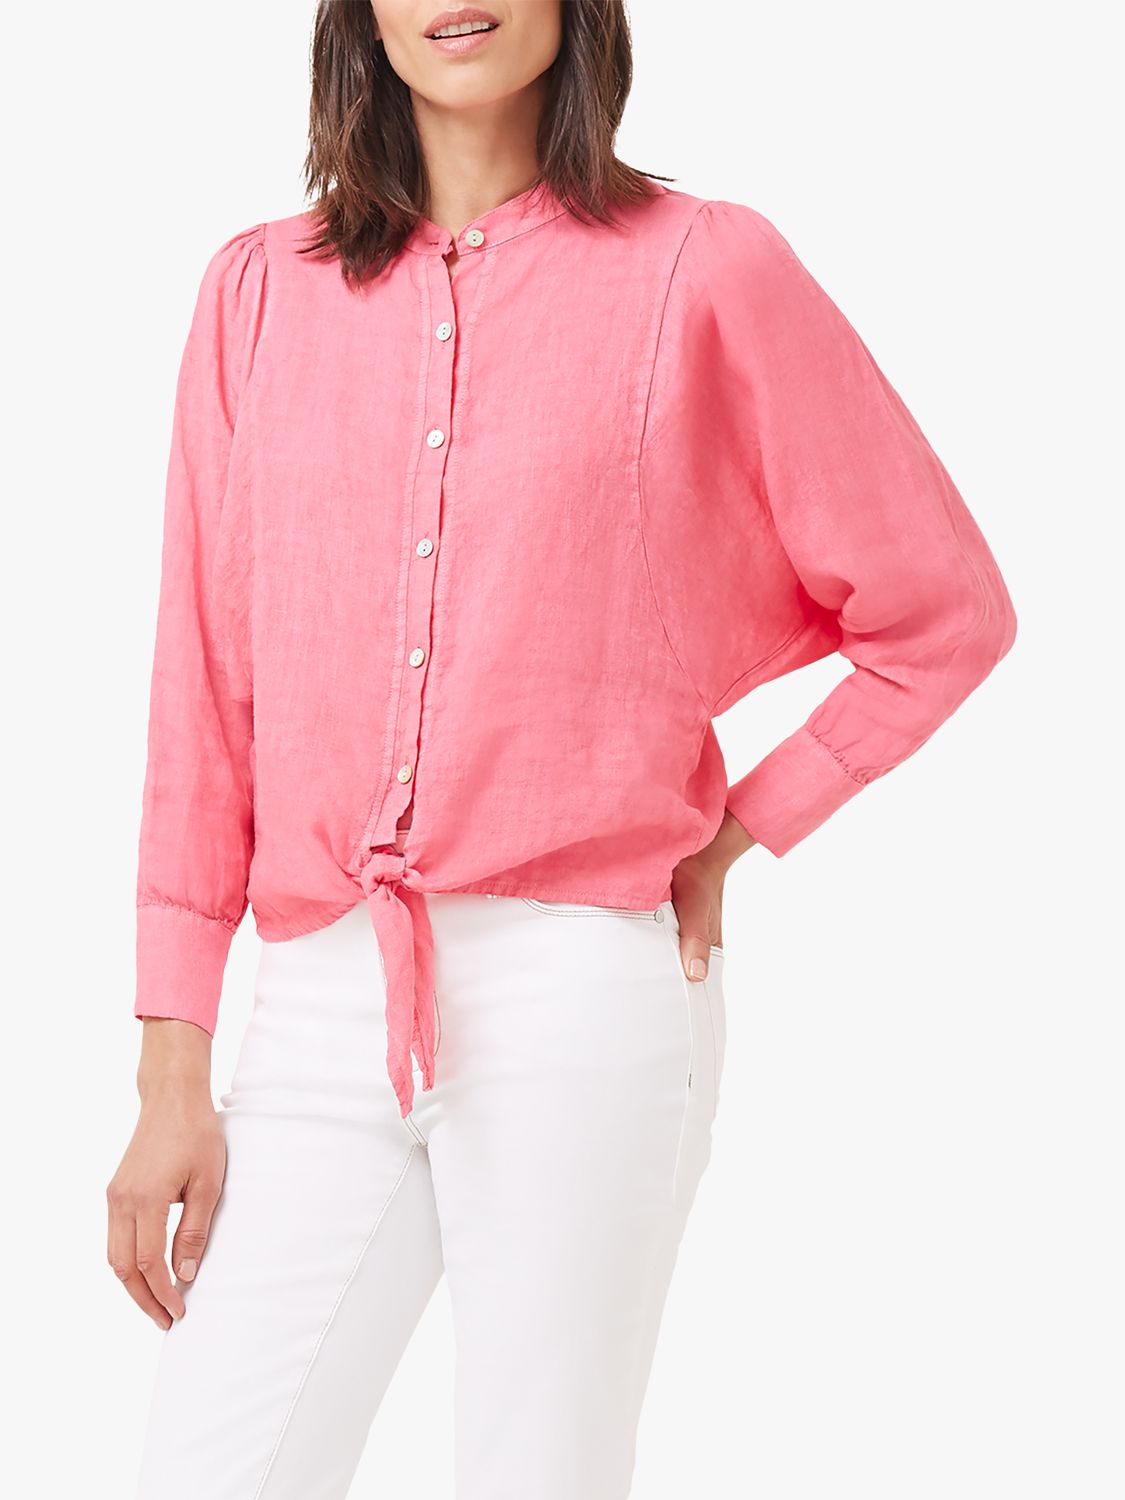 Women's Tops & Blouses, Going Out Tops, Phase Eight